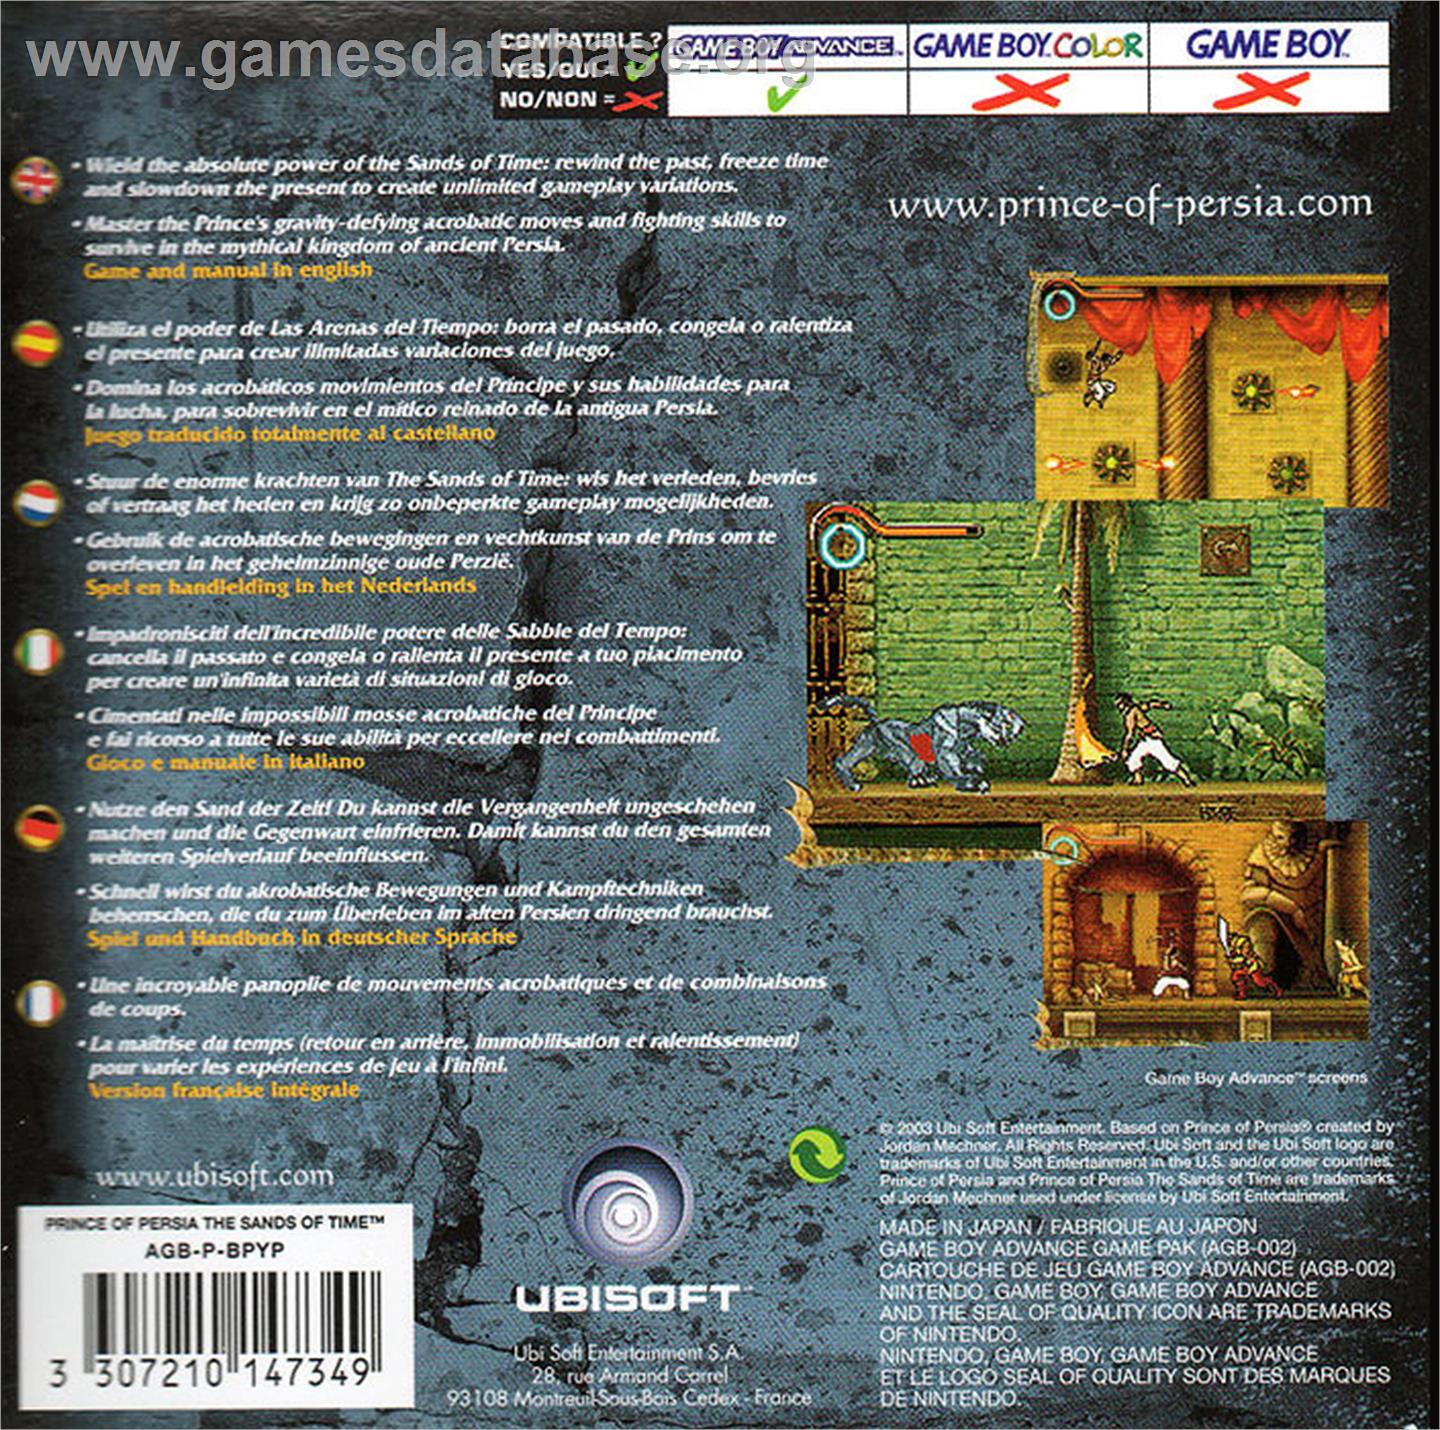 Prince of Persia: The Sands of Time - Nintendo Game Boy Advance - Artwork - Box Back